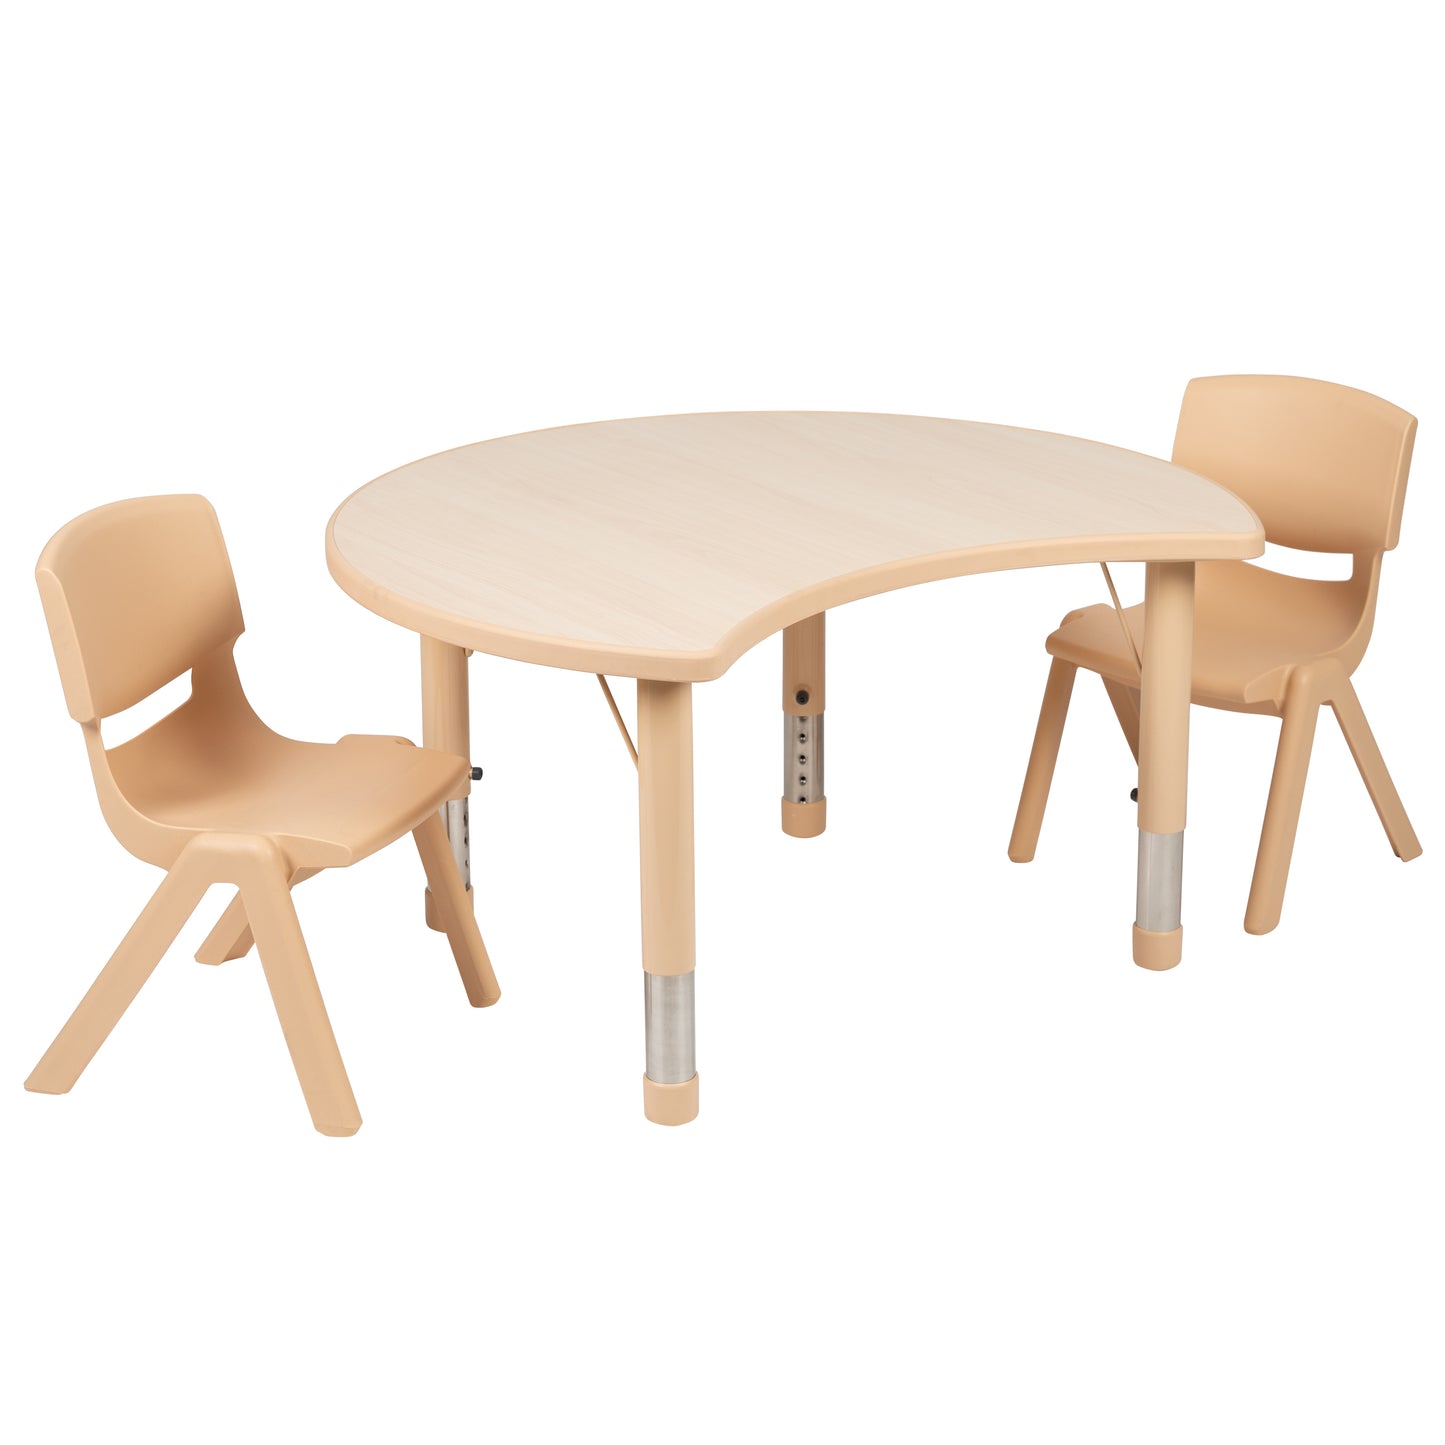 Emmy 25.125"W x 35.5"L Crescent Natural Plastic Height Adjustable Activity Table Set with 2 Chairs